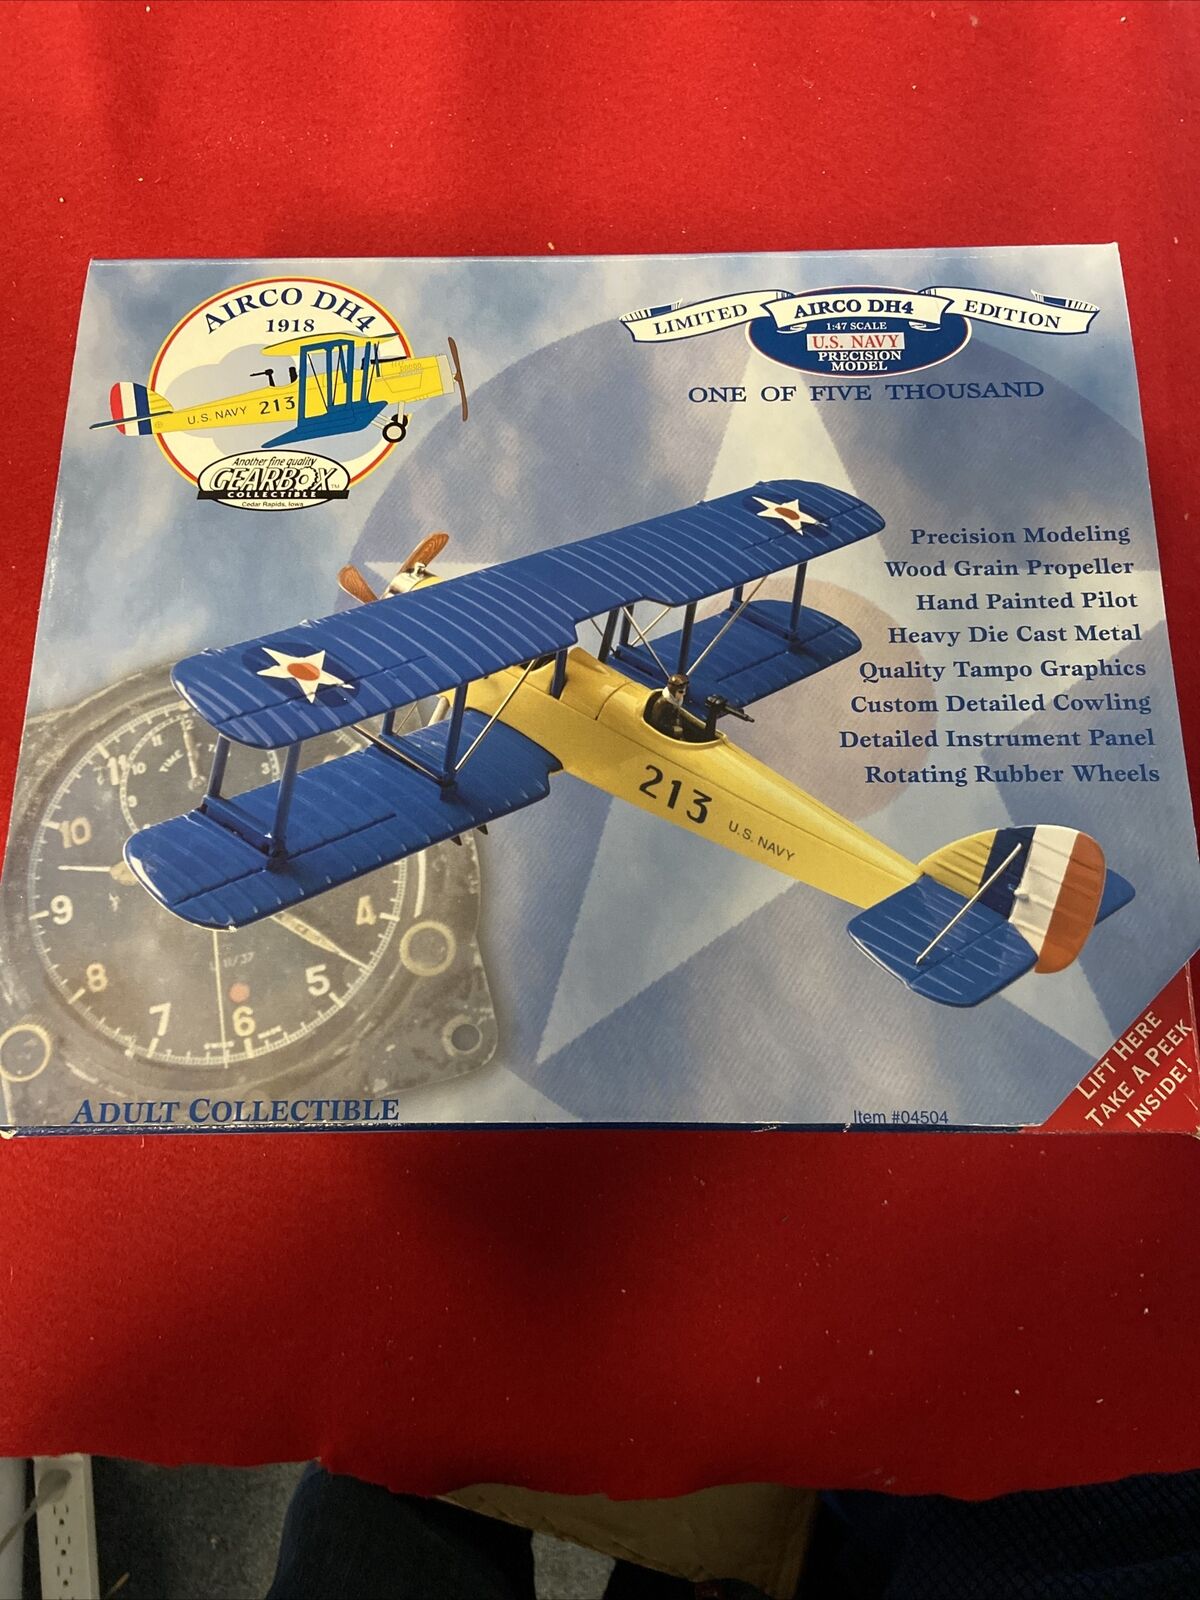 Gearbox Collectibles 1:47 1918 Diecast Airco DH4 US Navy WWI Airplane Coin Bank